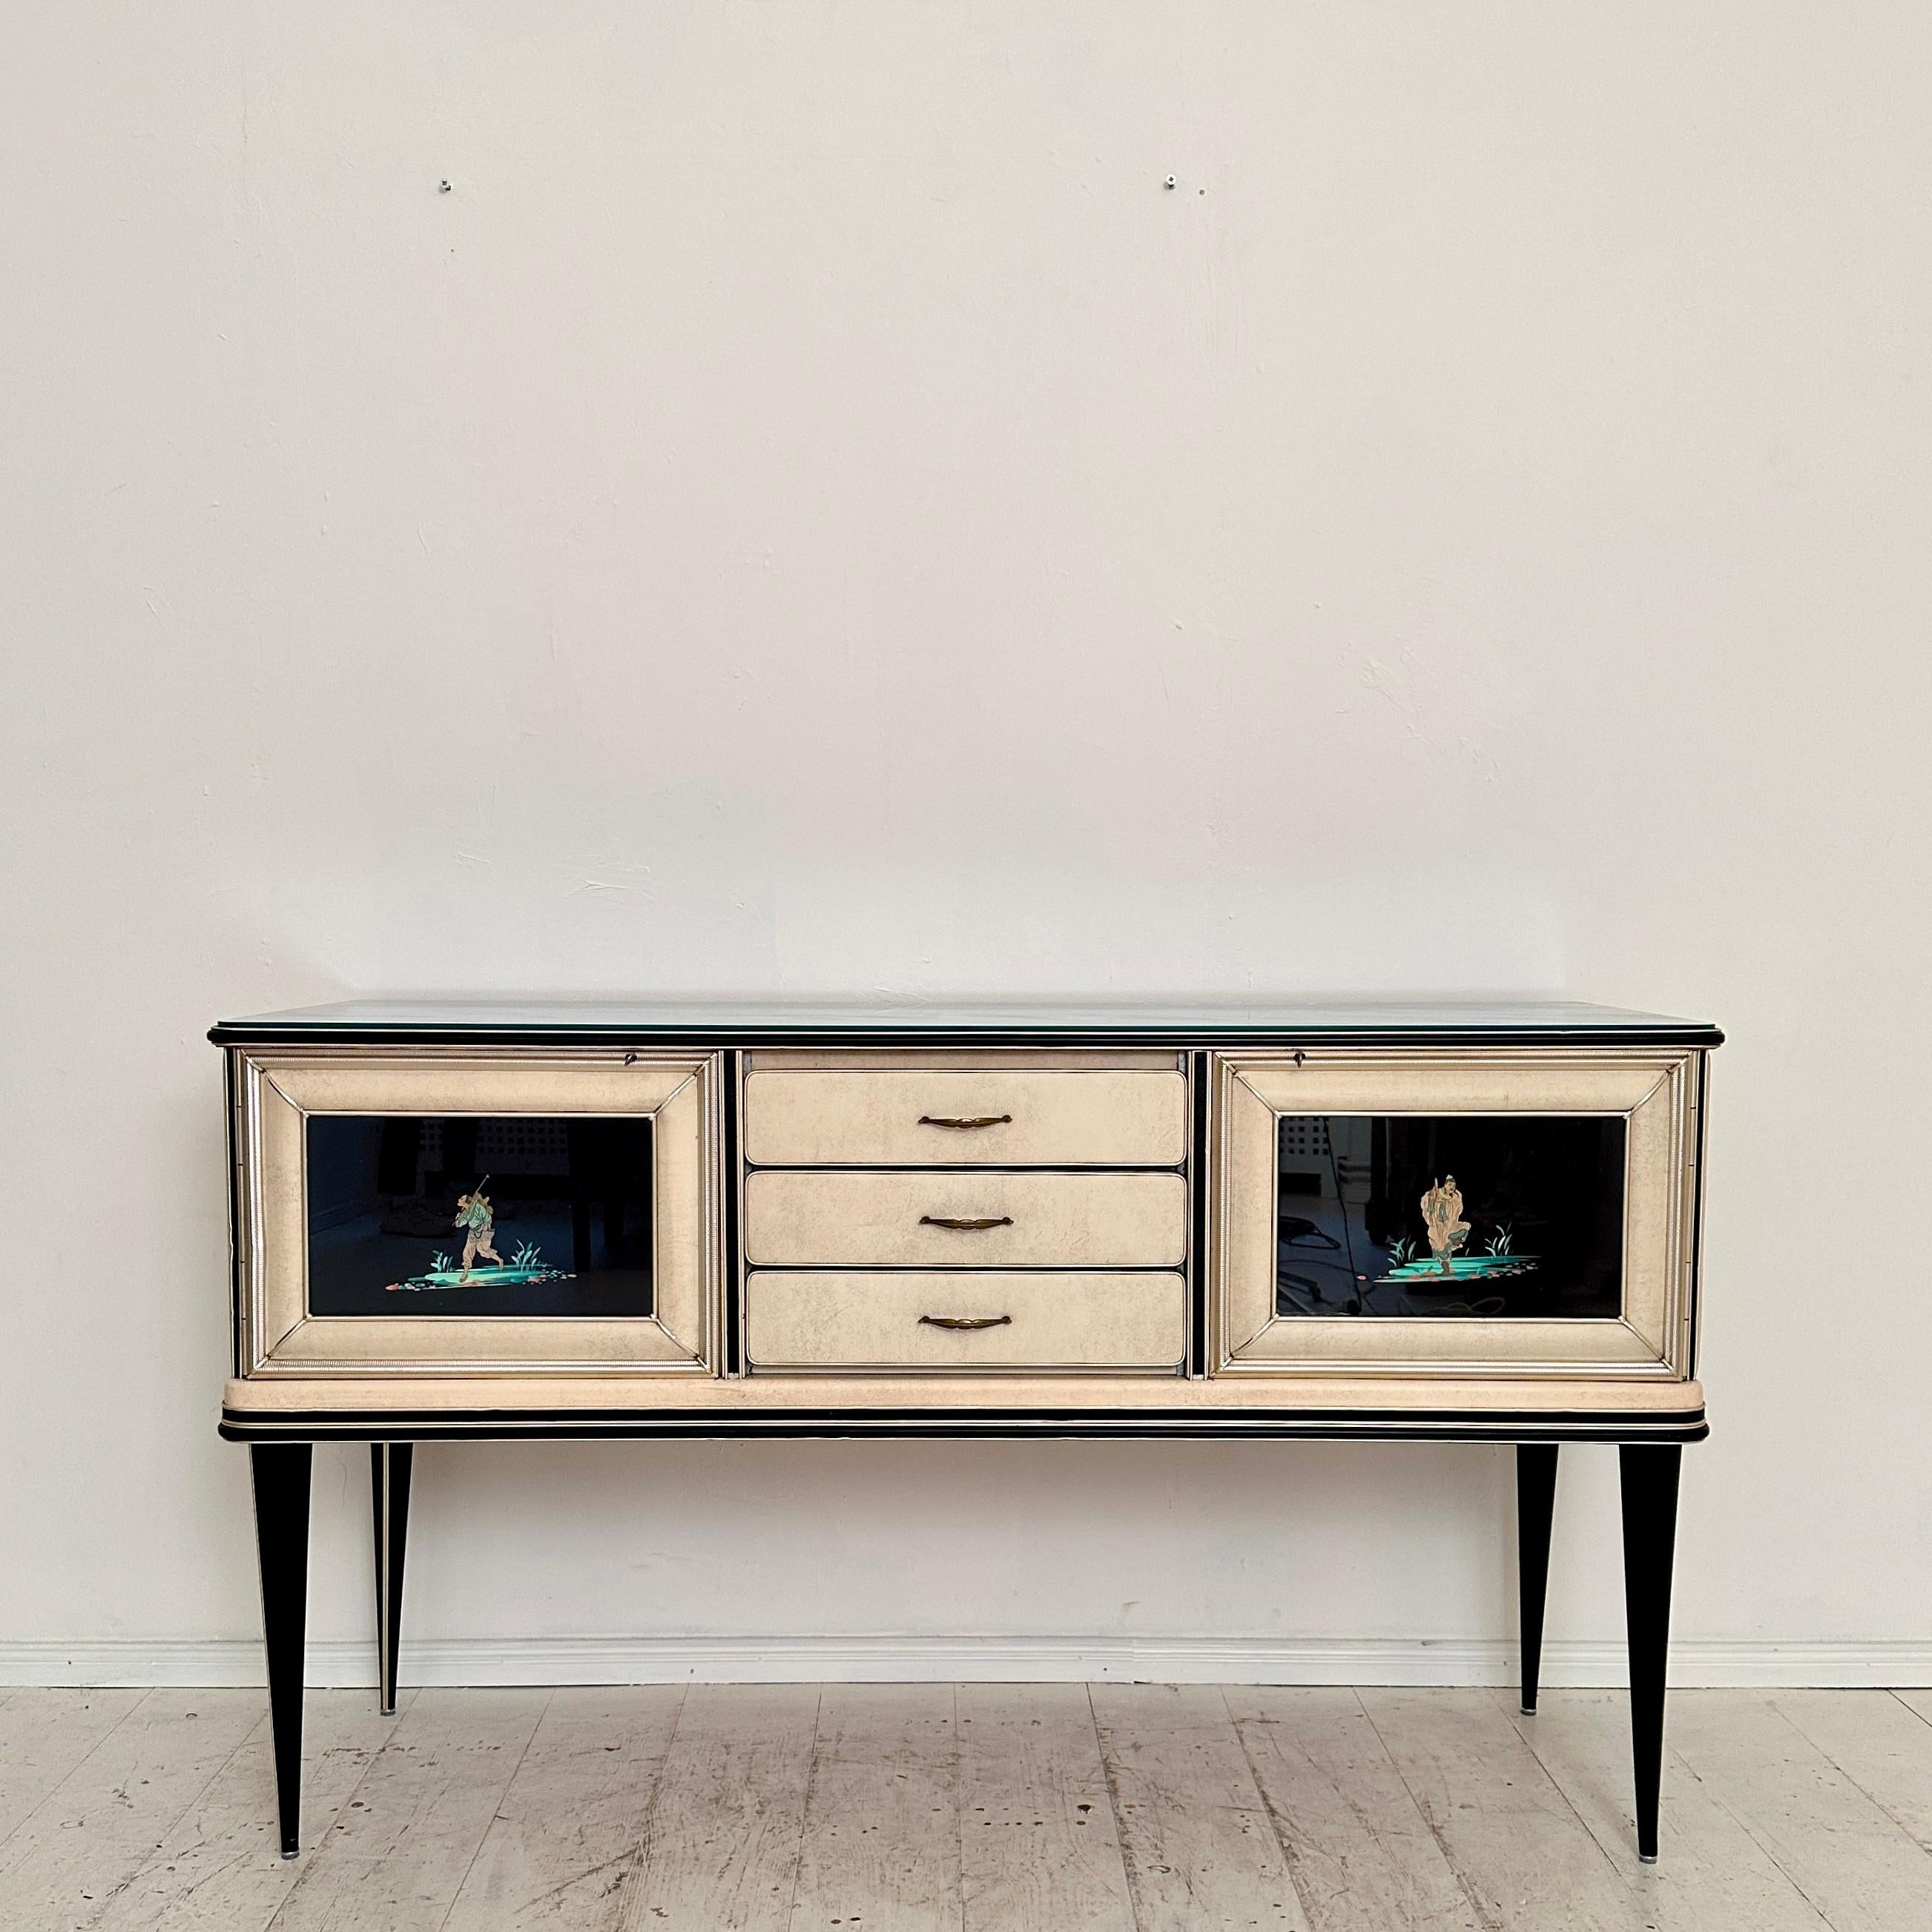 This fantastic Mid-Century Chinoserie Sideboard by Umberto Mascagni was build as a limited Edition for Harrods London around 1953.
It has got a door with shelf on each side and 3 drawers in the middle.
A unique piece which is a great eye-catcher for